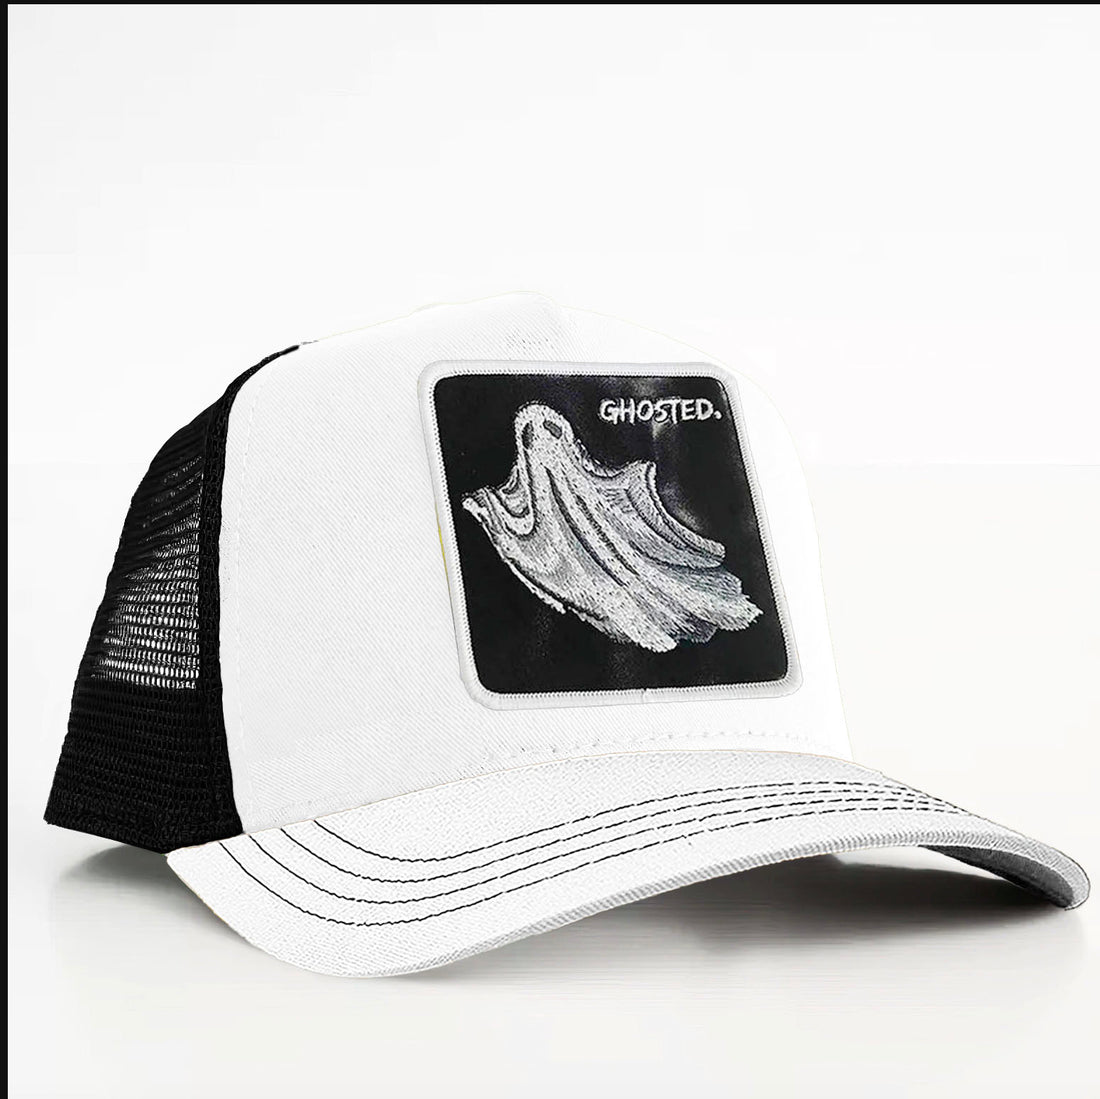 Ghost - "Ghosted" Trucker Hat